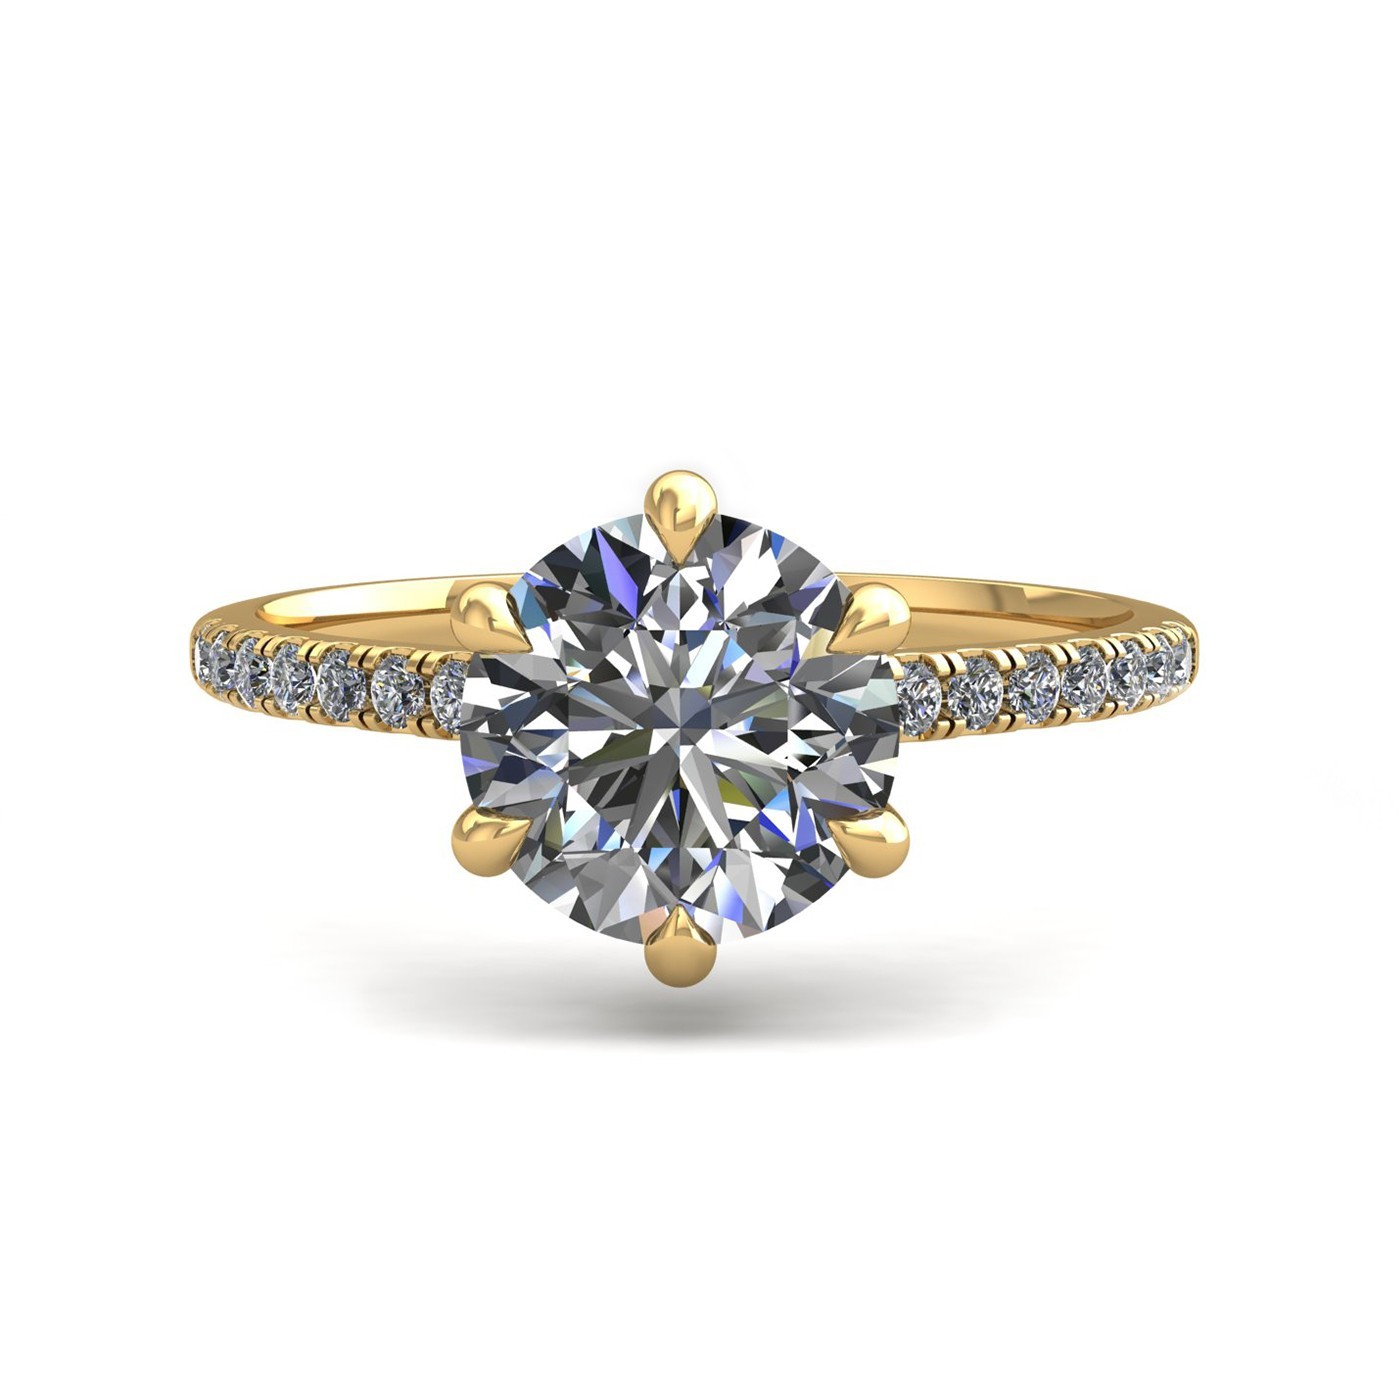 18k yellow gold 2,50 ct 6 prongs round cut diamond engagement ring with whisper thin pavÉ set band Photos & images